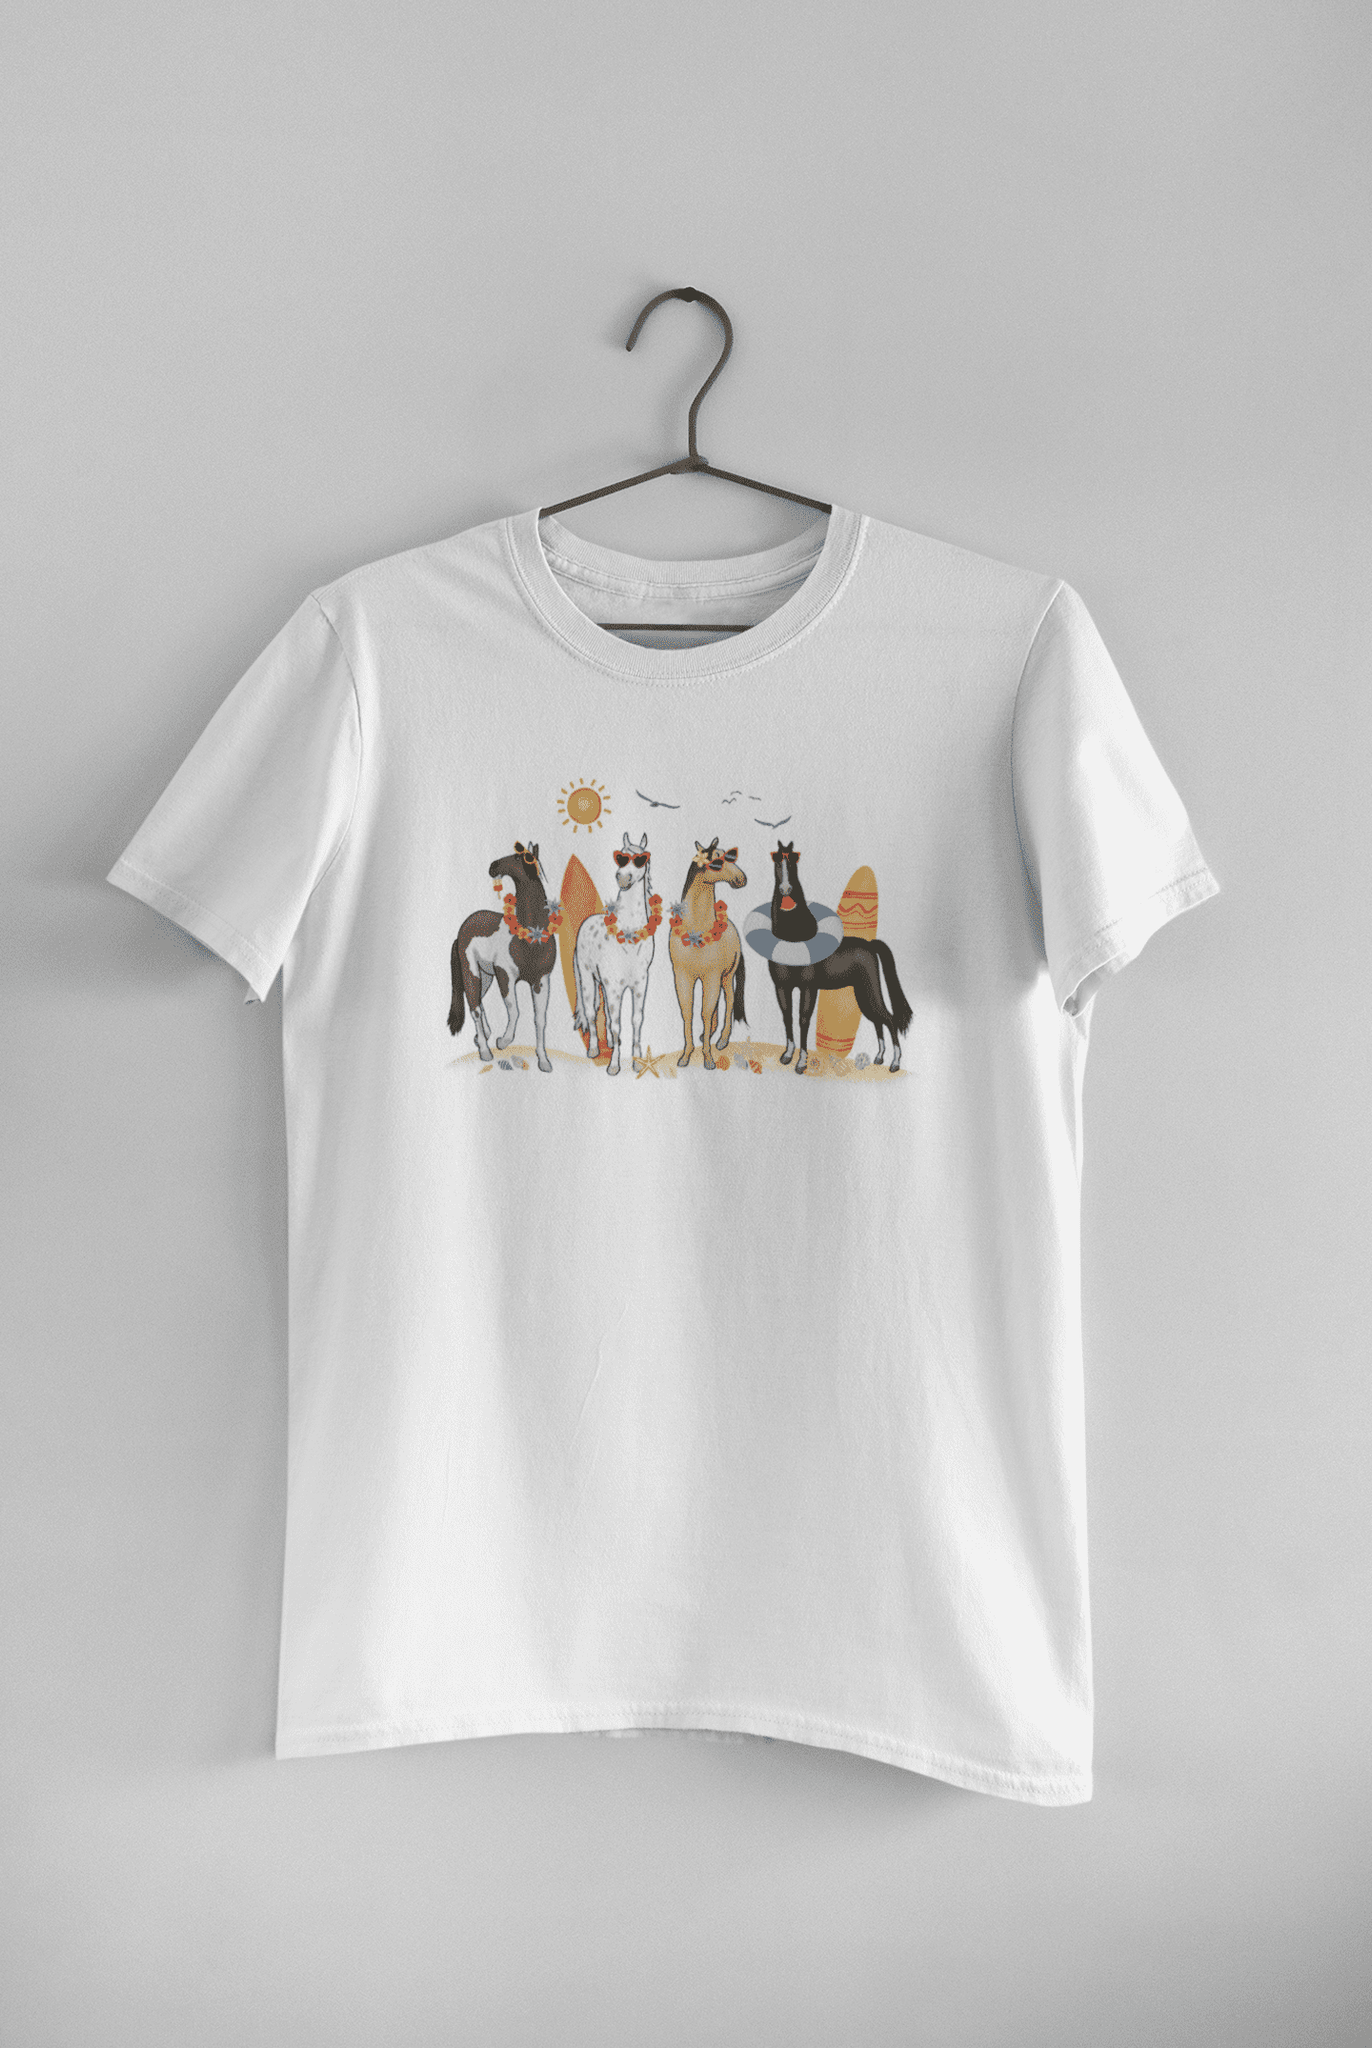 Hello Summer with Surfing Horses T-shirt